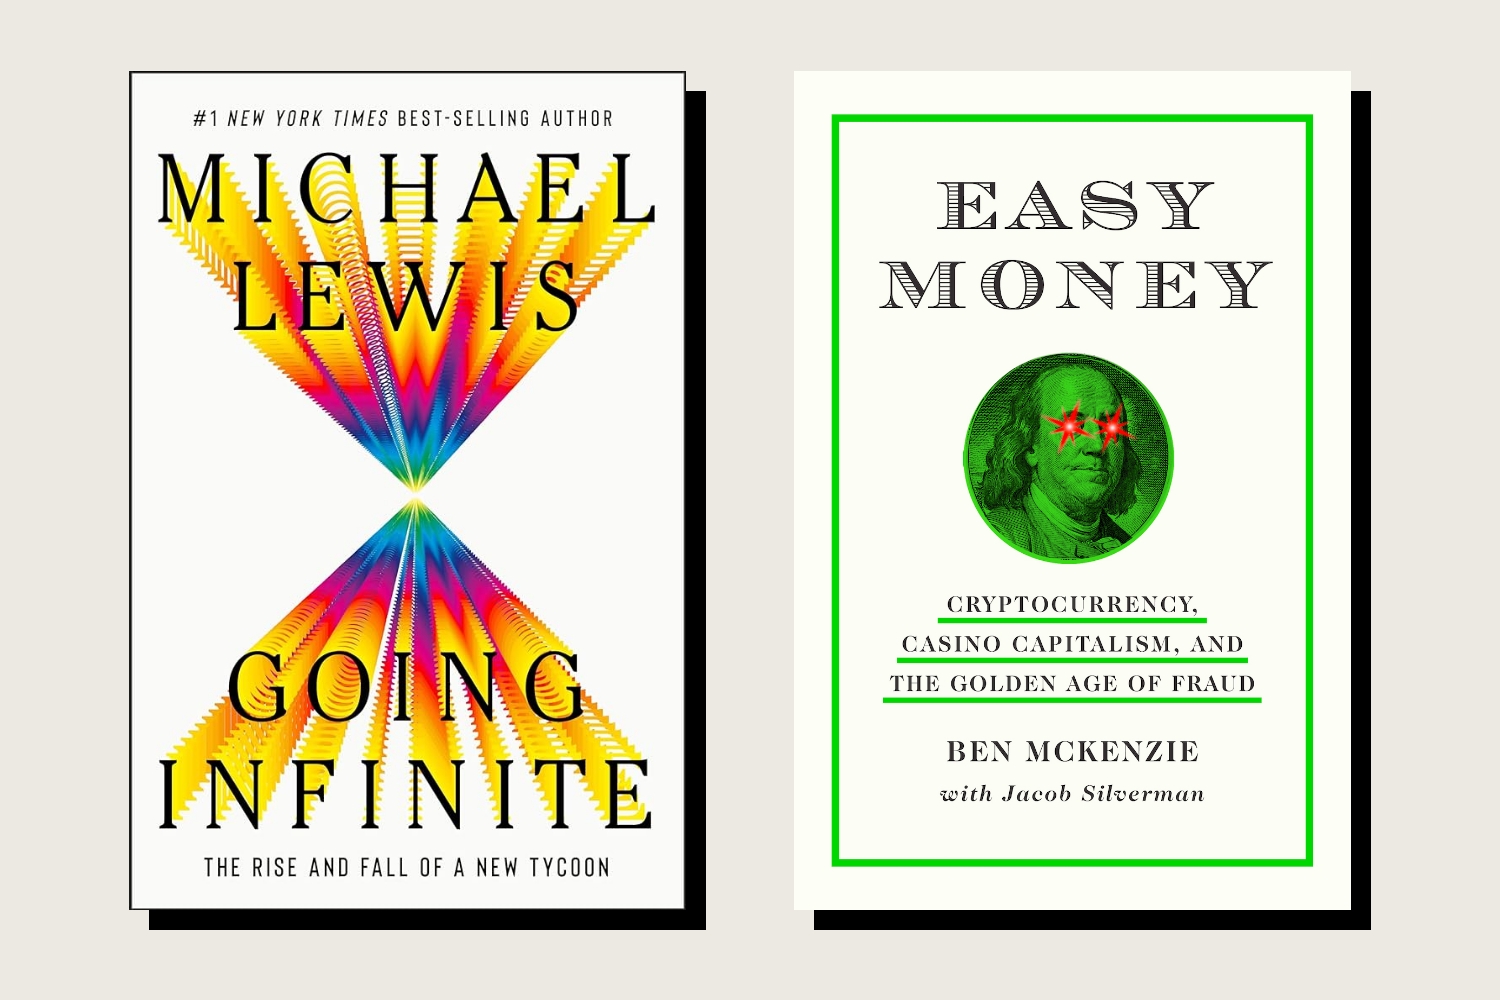 Book covers for Going Infinite: The Rise and Fall of a New Tycoon by Michael Lewis and Easy Money: Cryptocurrency, Casino Capitalism, and the Golden Age of Fraud by Ben McKenzie.